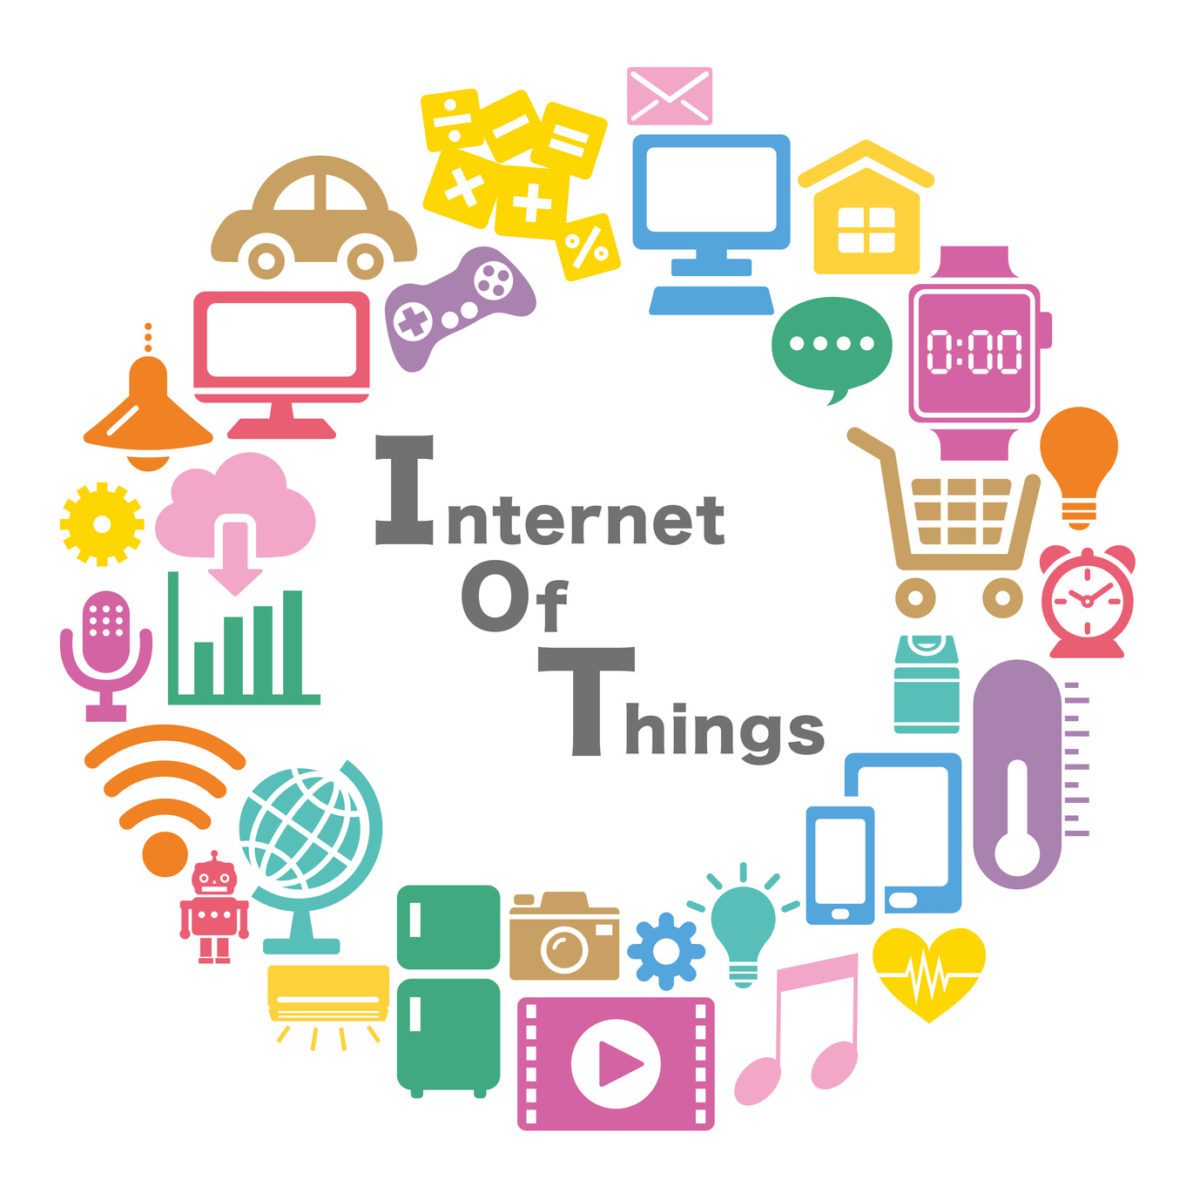 Social Media Marketing and the Internet of Things